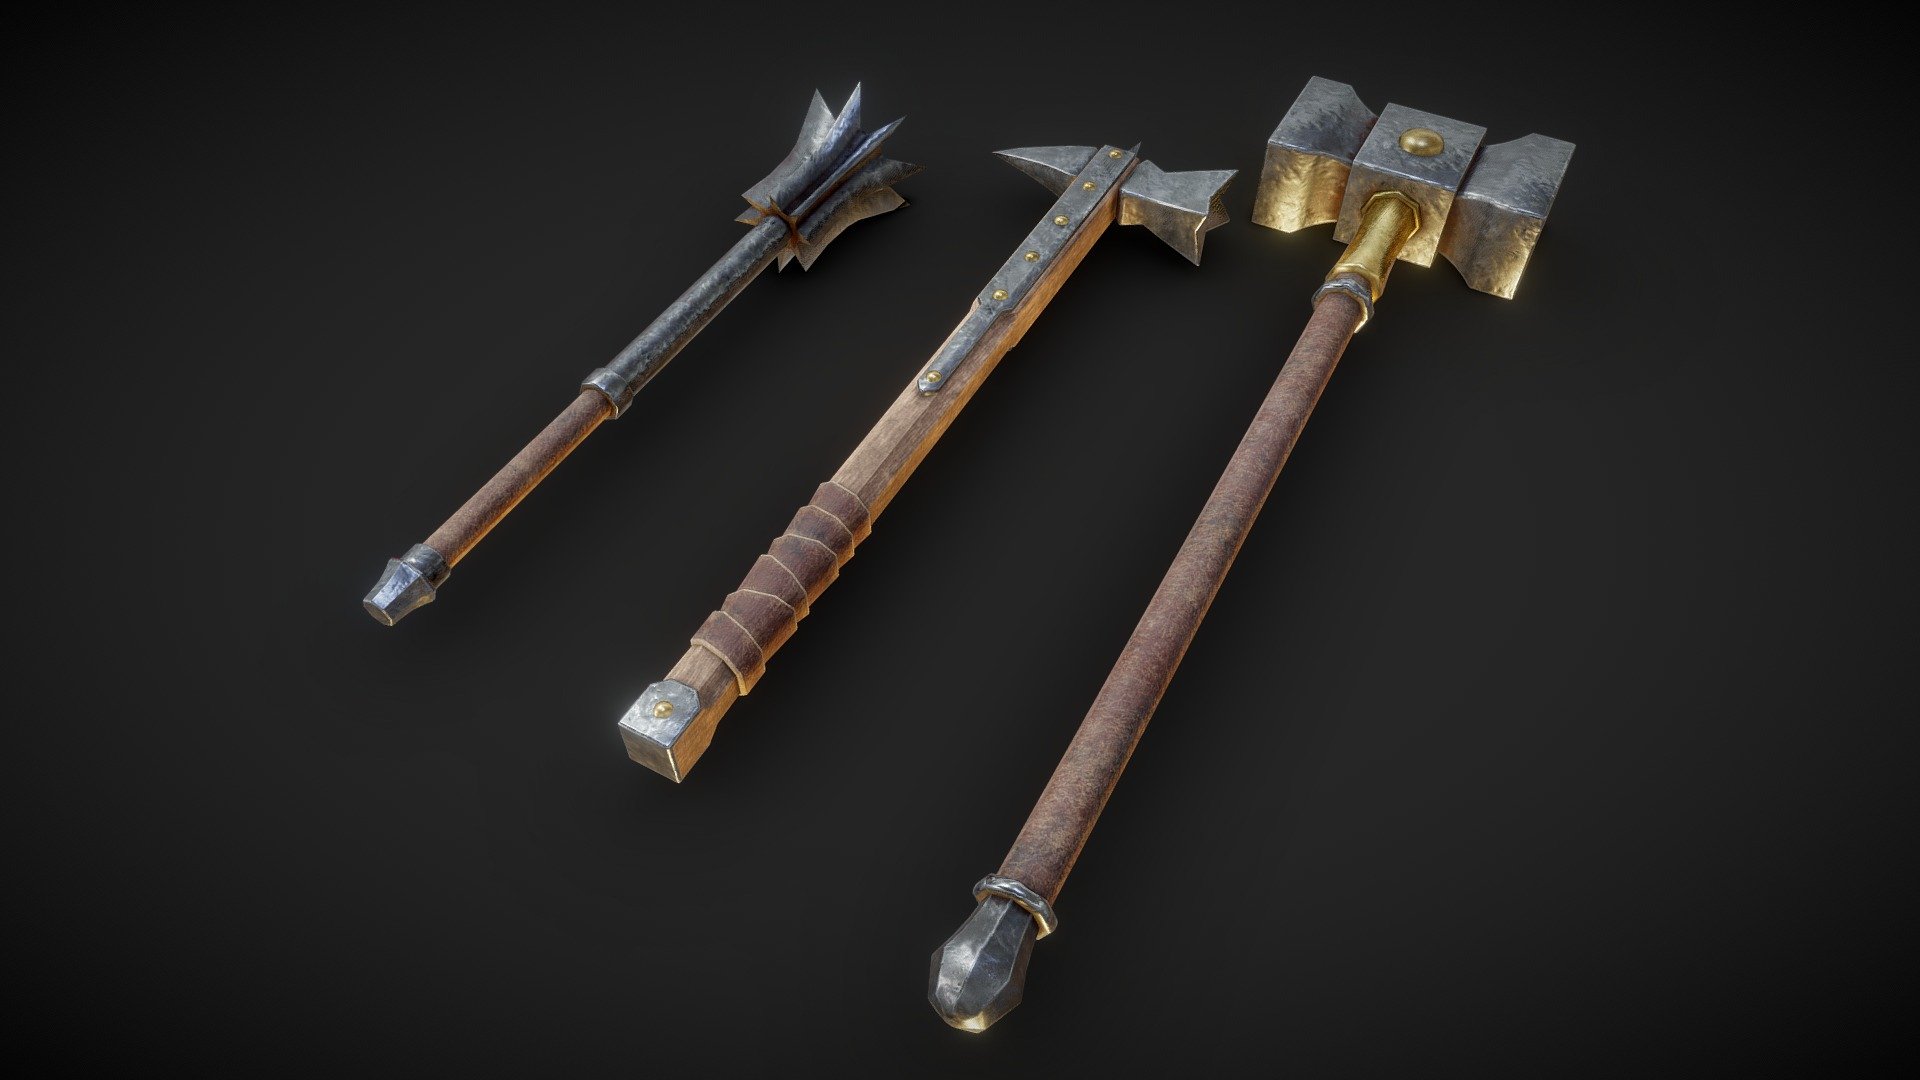 sketchfab viewport texturesat 2k , Rar file textures at 4k.

Fbx and obj files.

Mace polys: 538.
Mace Verts: 656.

Warhammer polys: 907.
Warhammer verts: 993.

Maul polys: 700.
Maul verts: 767.

Unity5 textures: Albedo-Transparency , Metallic-Smoothness , Normal. 
UnrealEngine textures: Base-Color , Normal , Occlusion-Roughness-Metallic 3d model